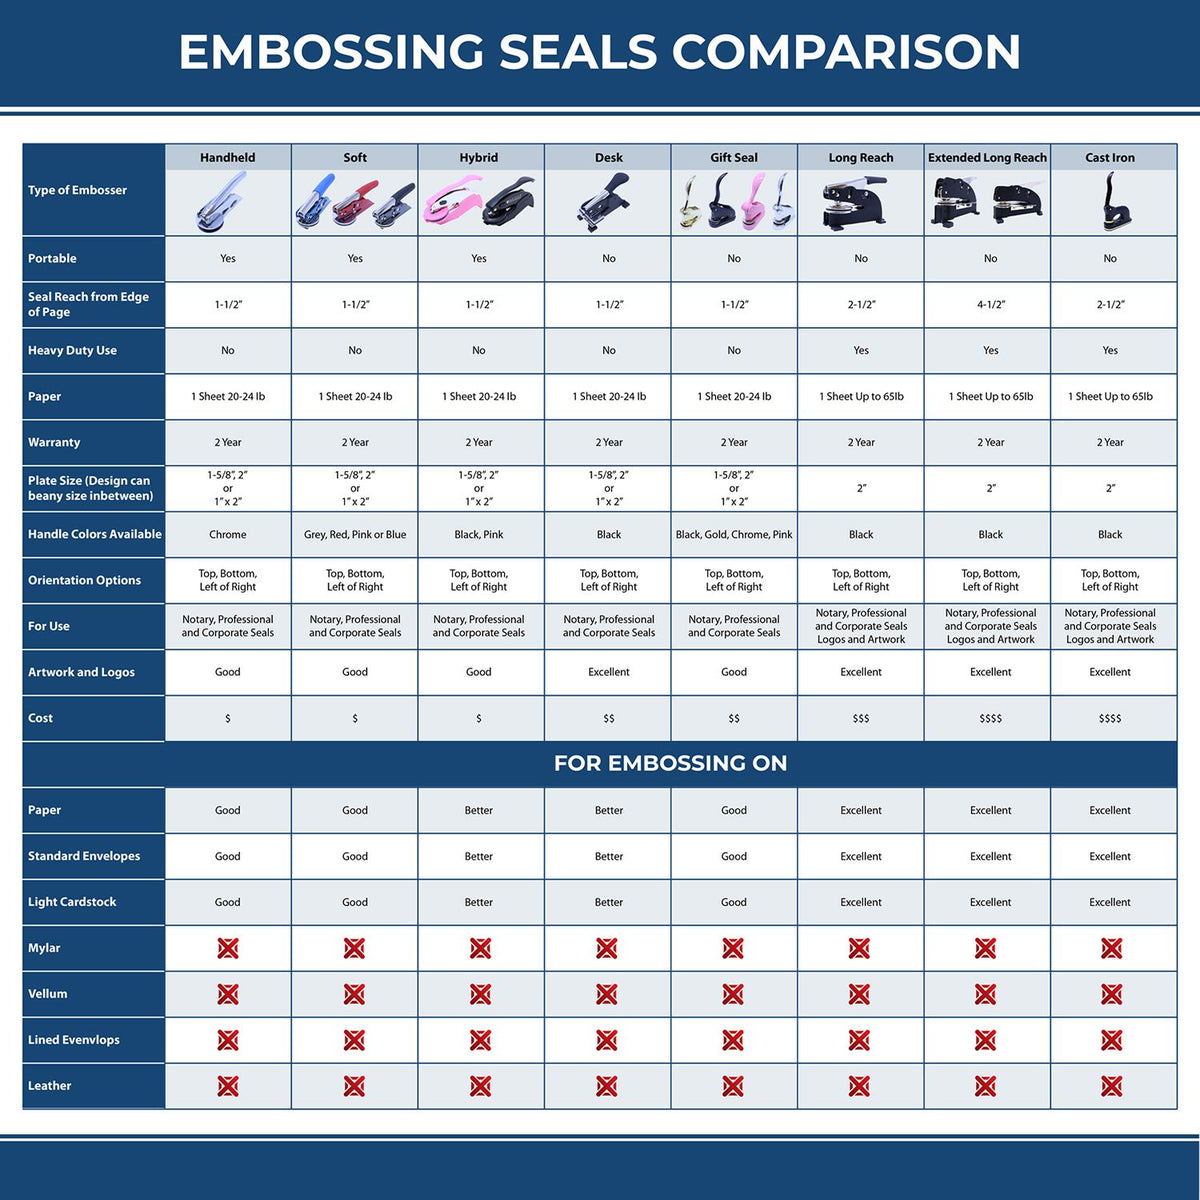 A comparison chart for the different types of mount models available for the Handheld Kansas Professional Geologist Embosser